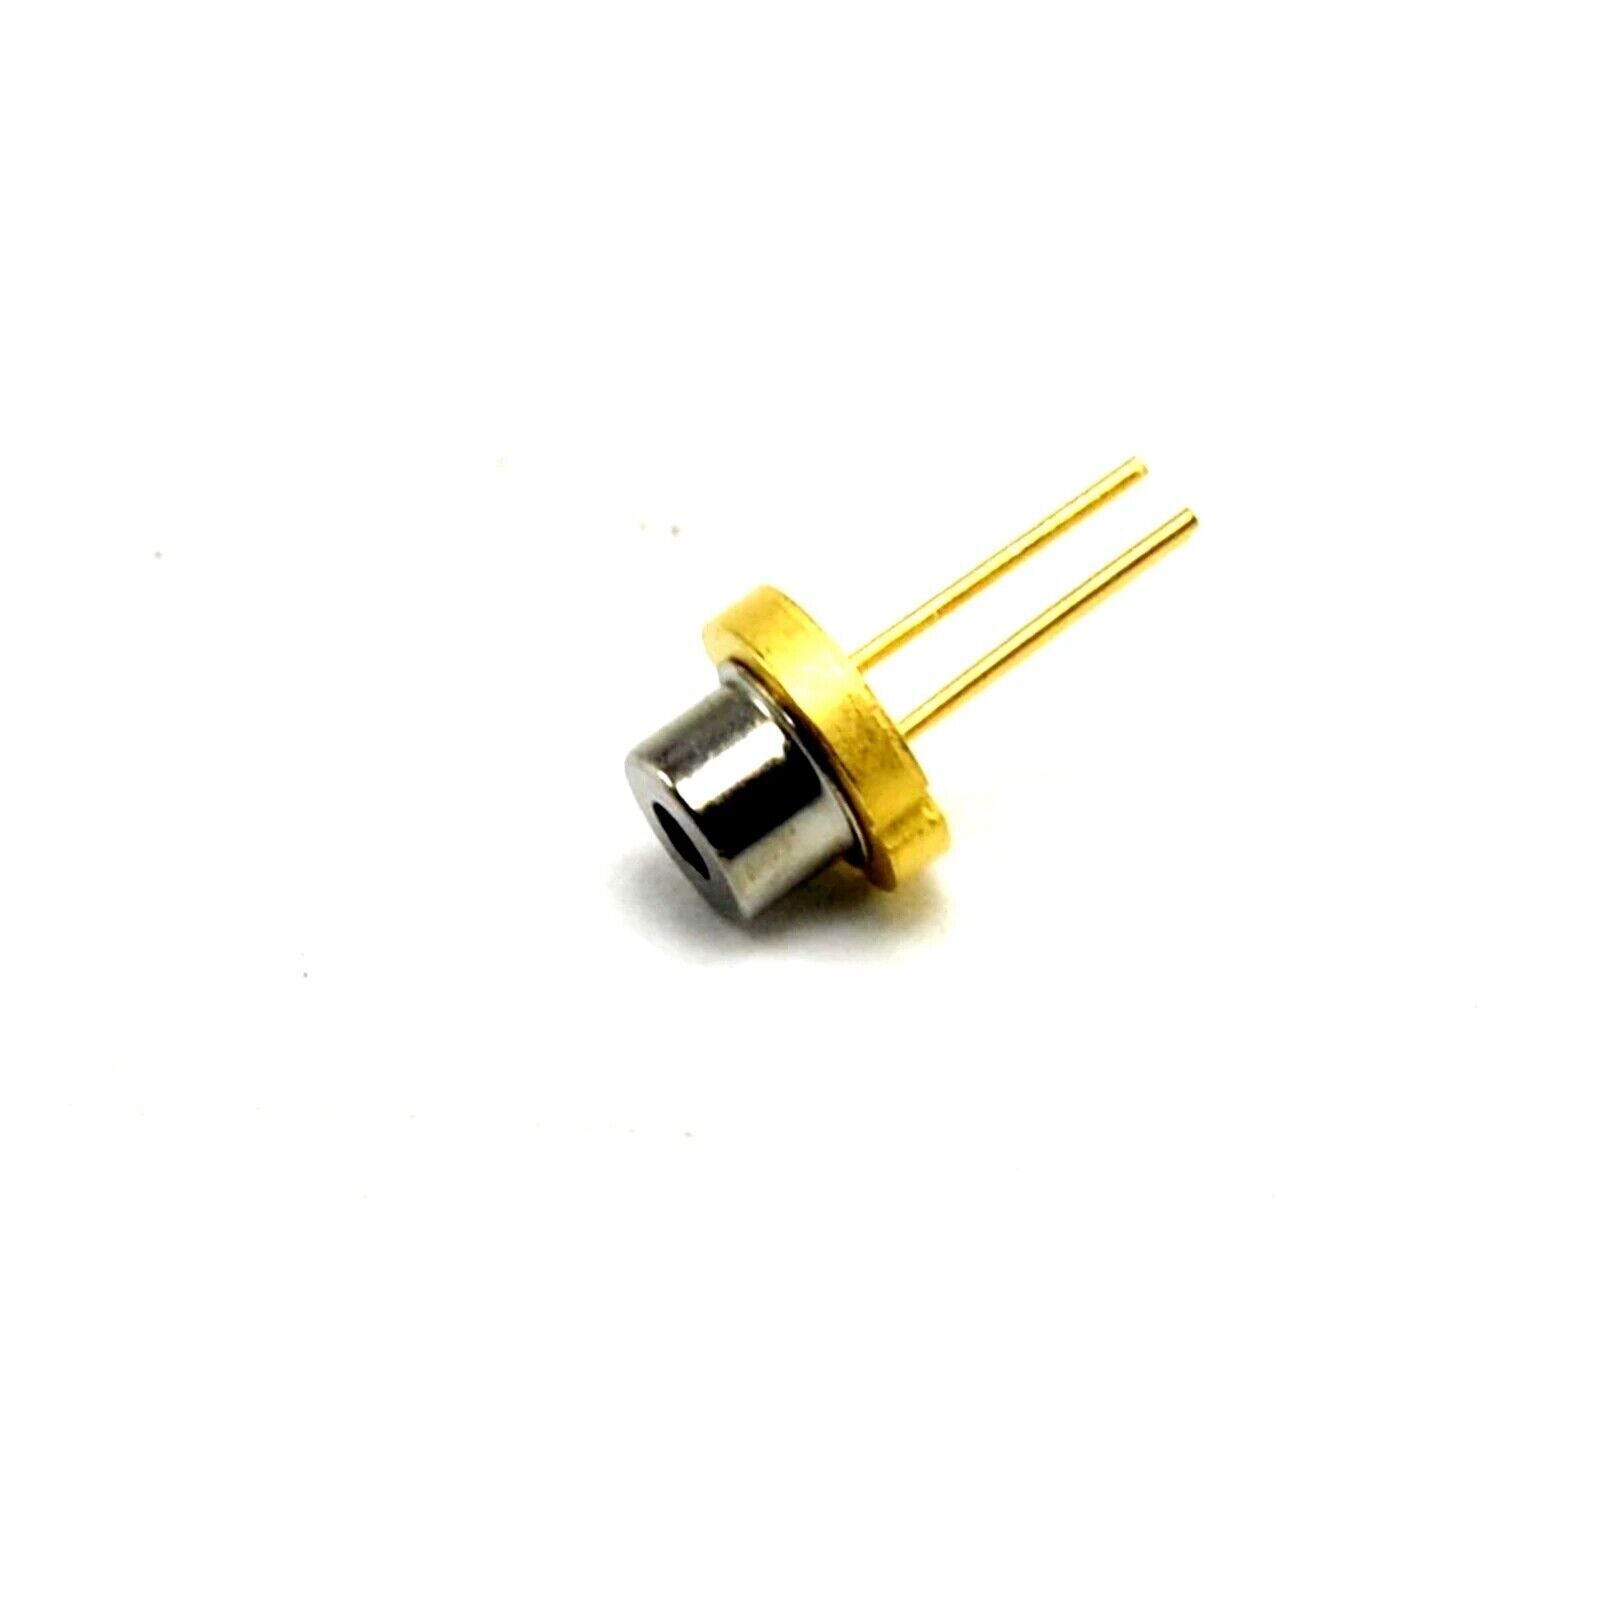 Ushio HL6750MG-A 685nm 55mW Red Laser Diode